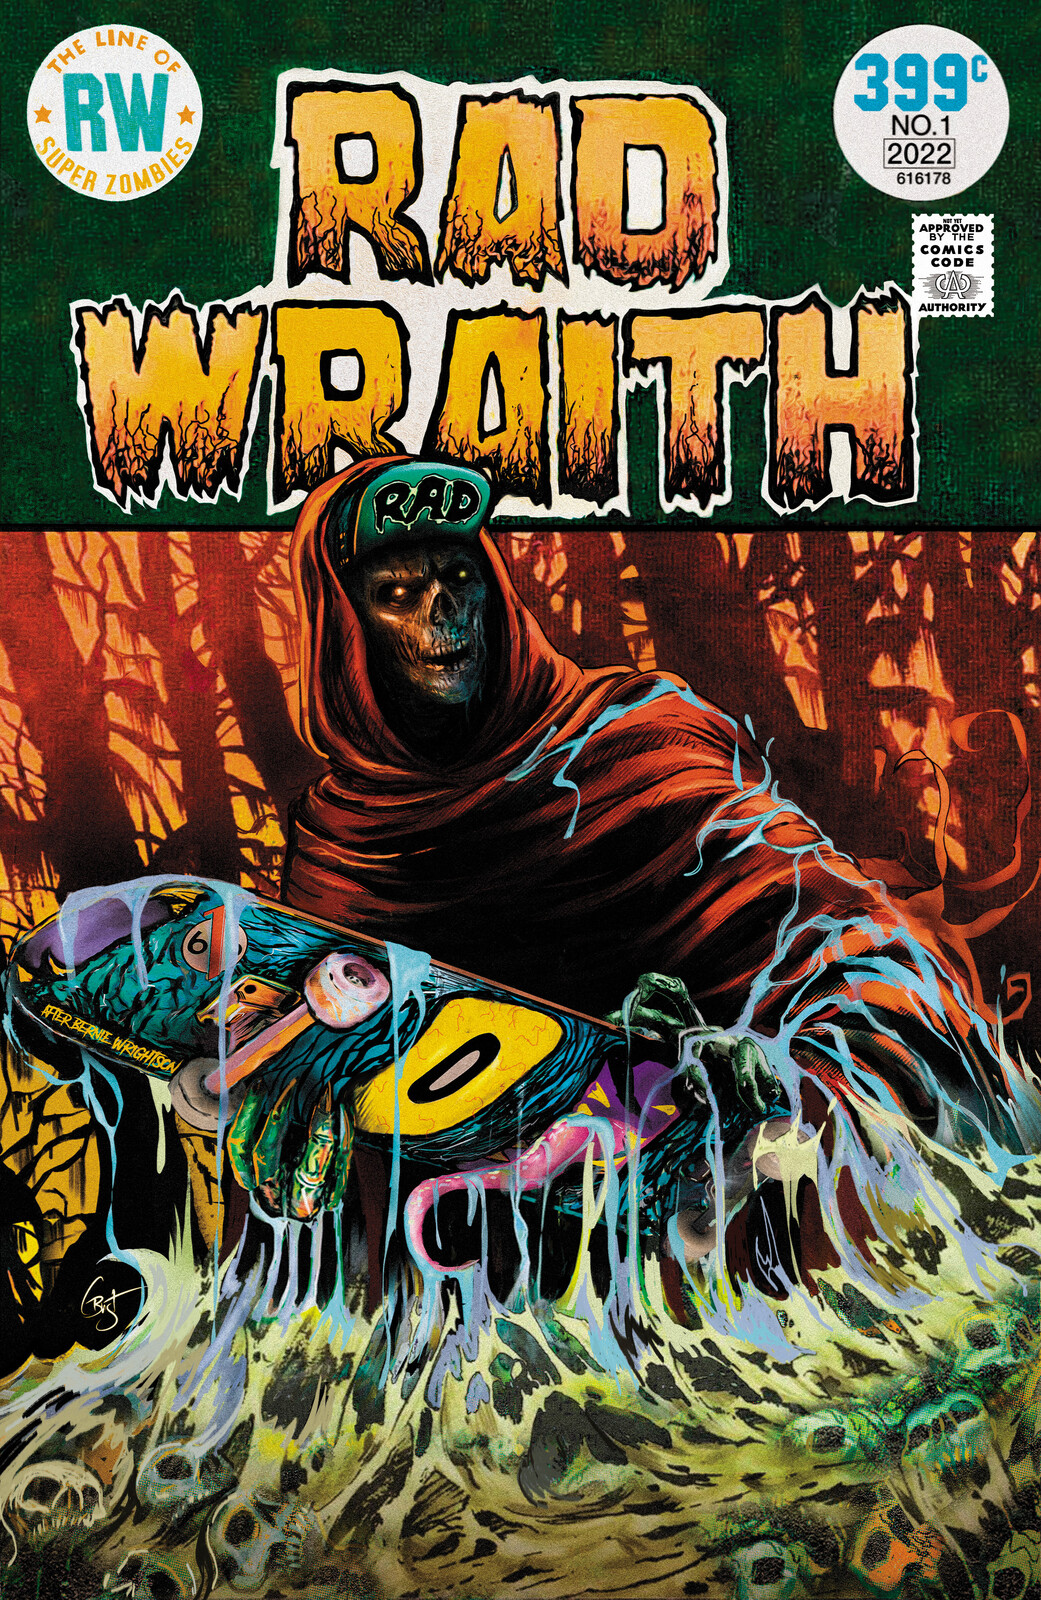 RAD WRAITH #1 COVER 2 SWAMP THING HOMAGE
Artwork by Christopher Bust